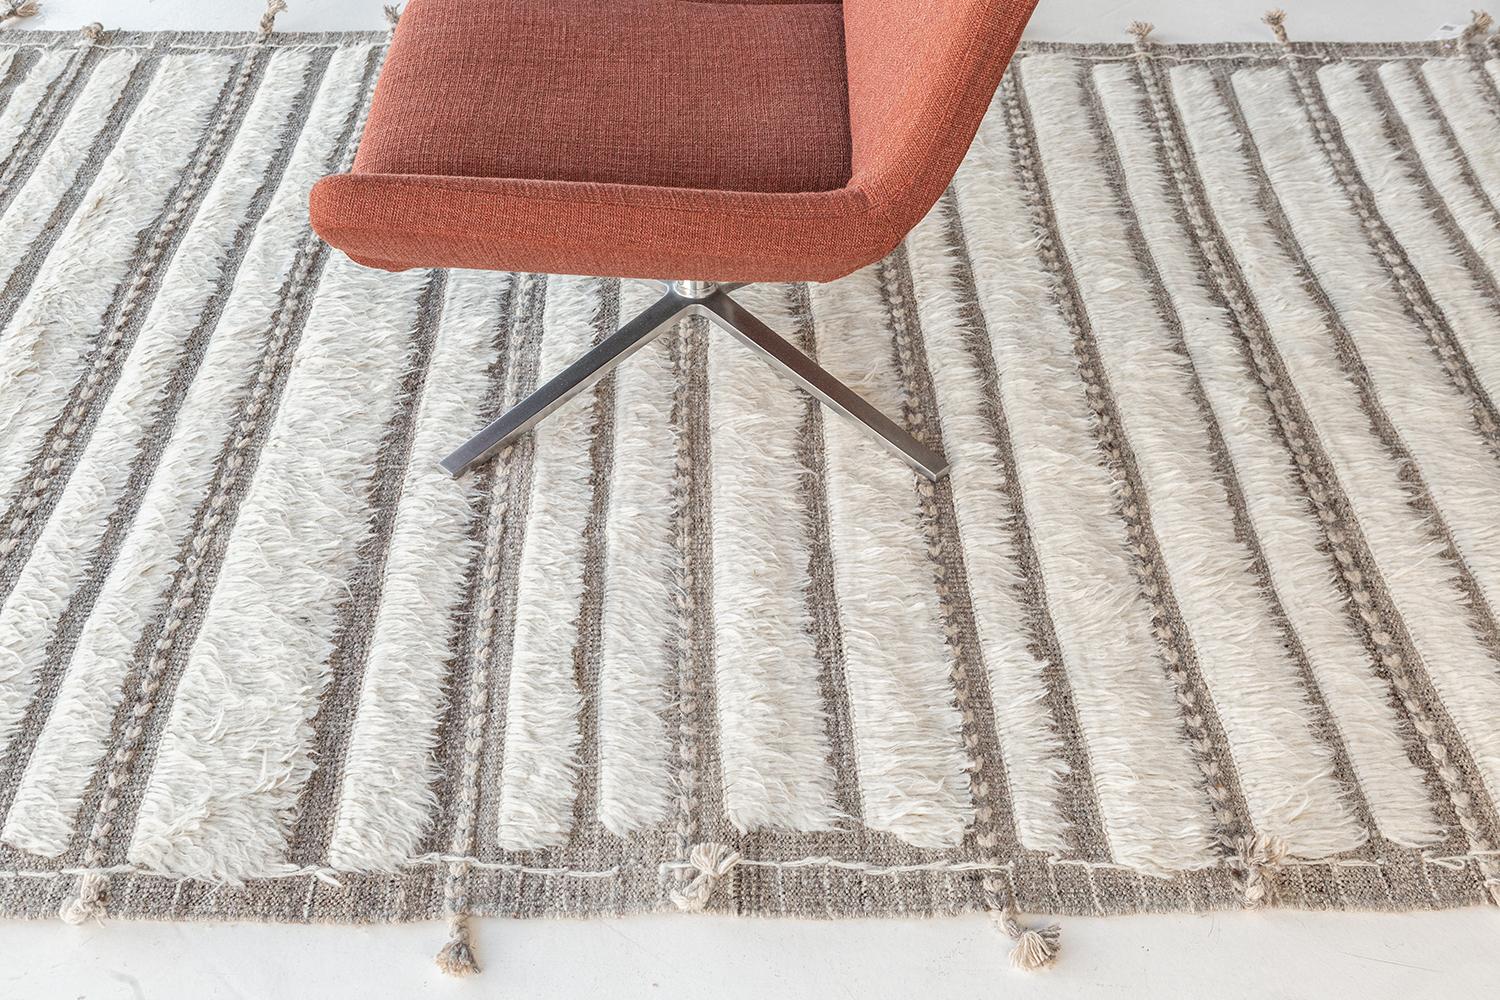 Abrolhos is a handwoven luxurious wool rug with timeless embossed detailing. In addition to its perfect ivory flat-weave, Albrohos has a beautiful shag that brings a lustrous texture and contemporary feel to one's space. The Haute Bohemian